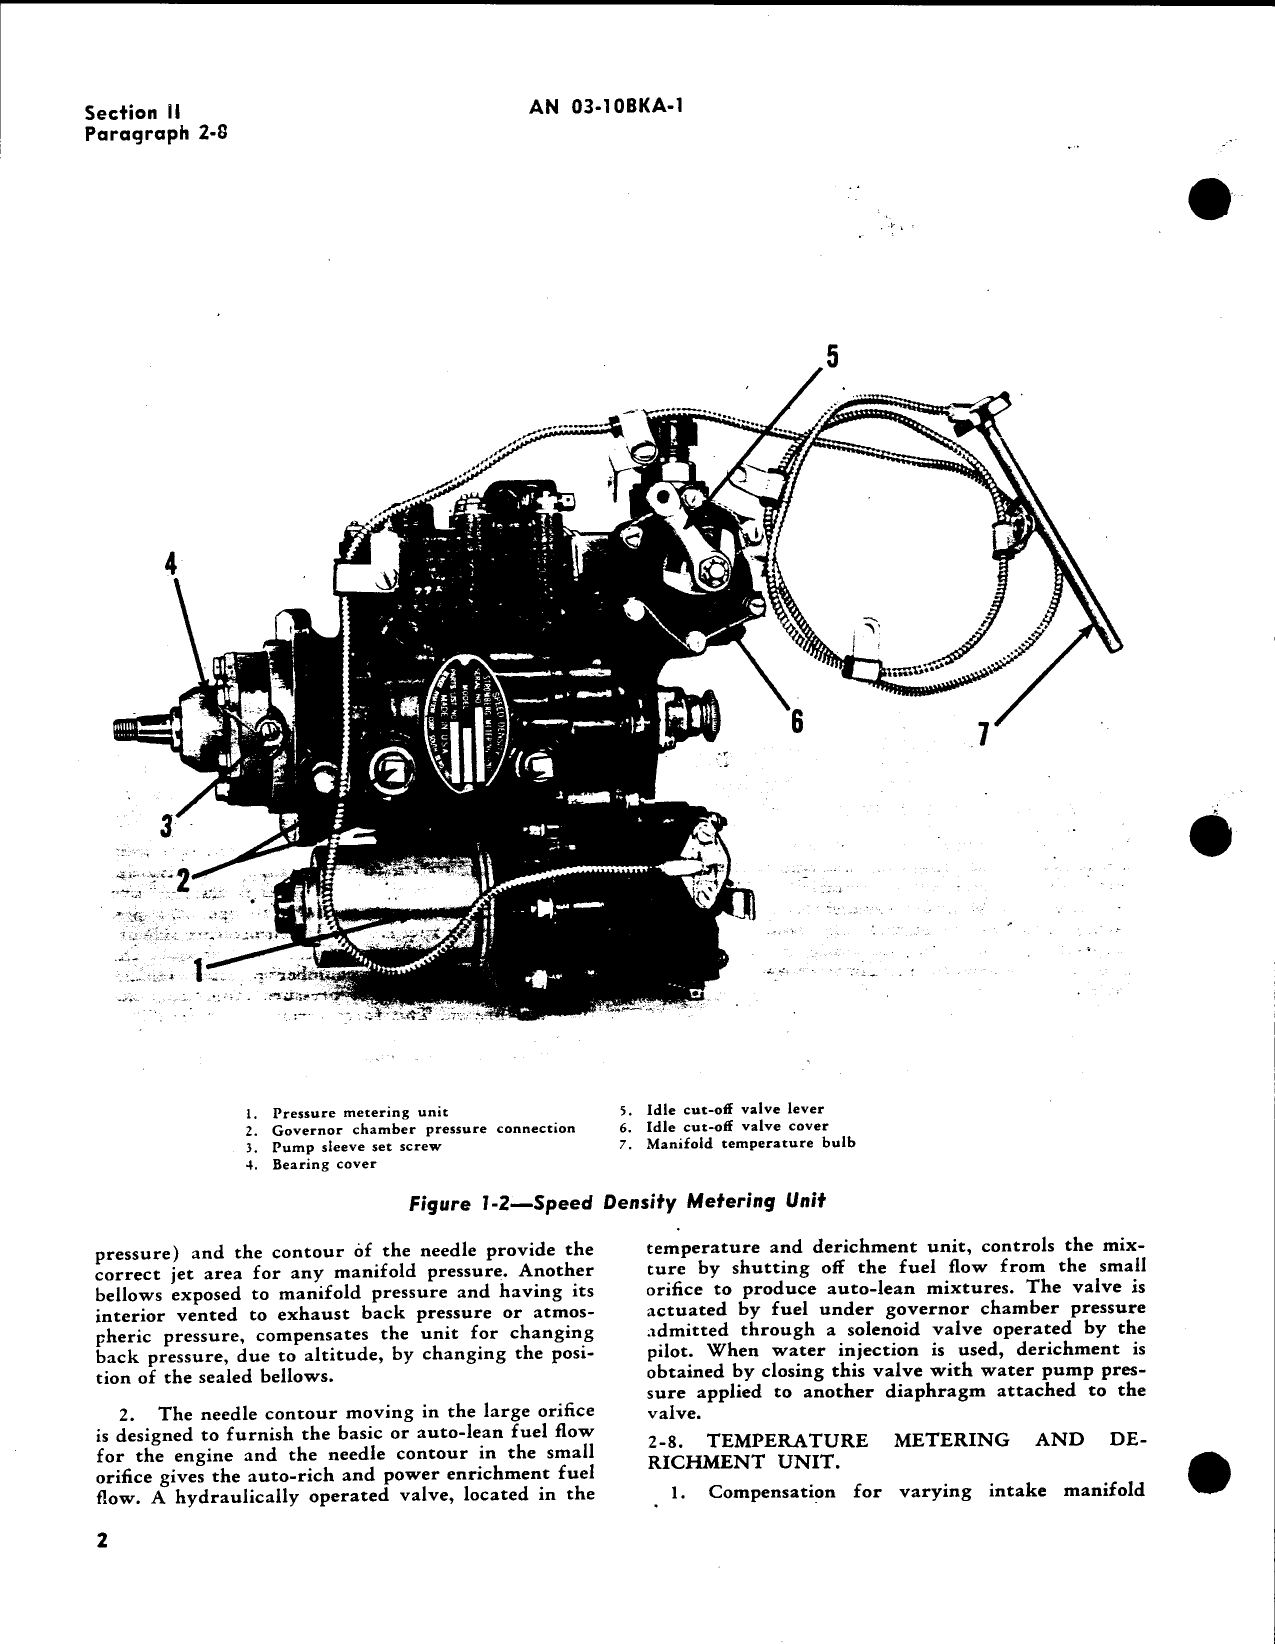 Sample page 6 from AirCorps Library document: Handbook Overhaul Instructions for Speed-Density Fuel Metering System (Bendix)